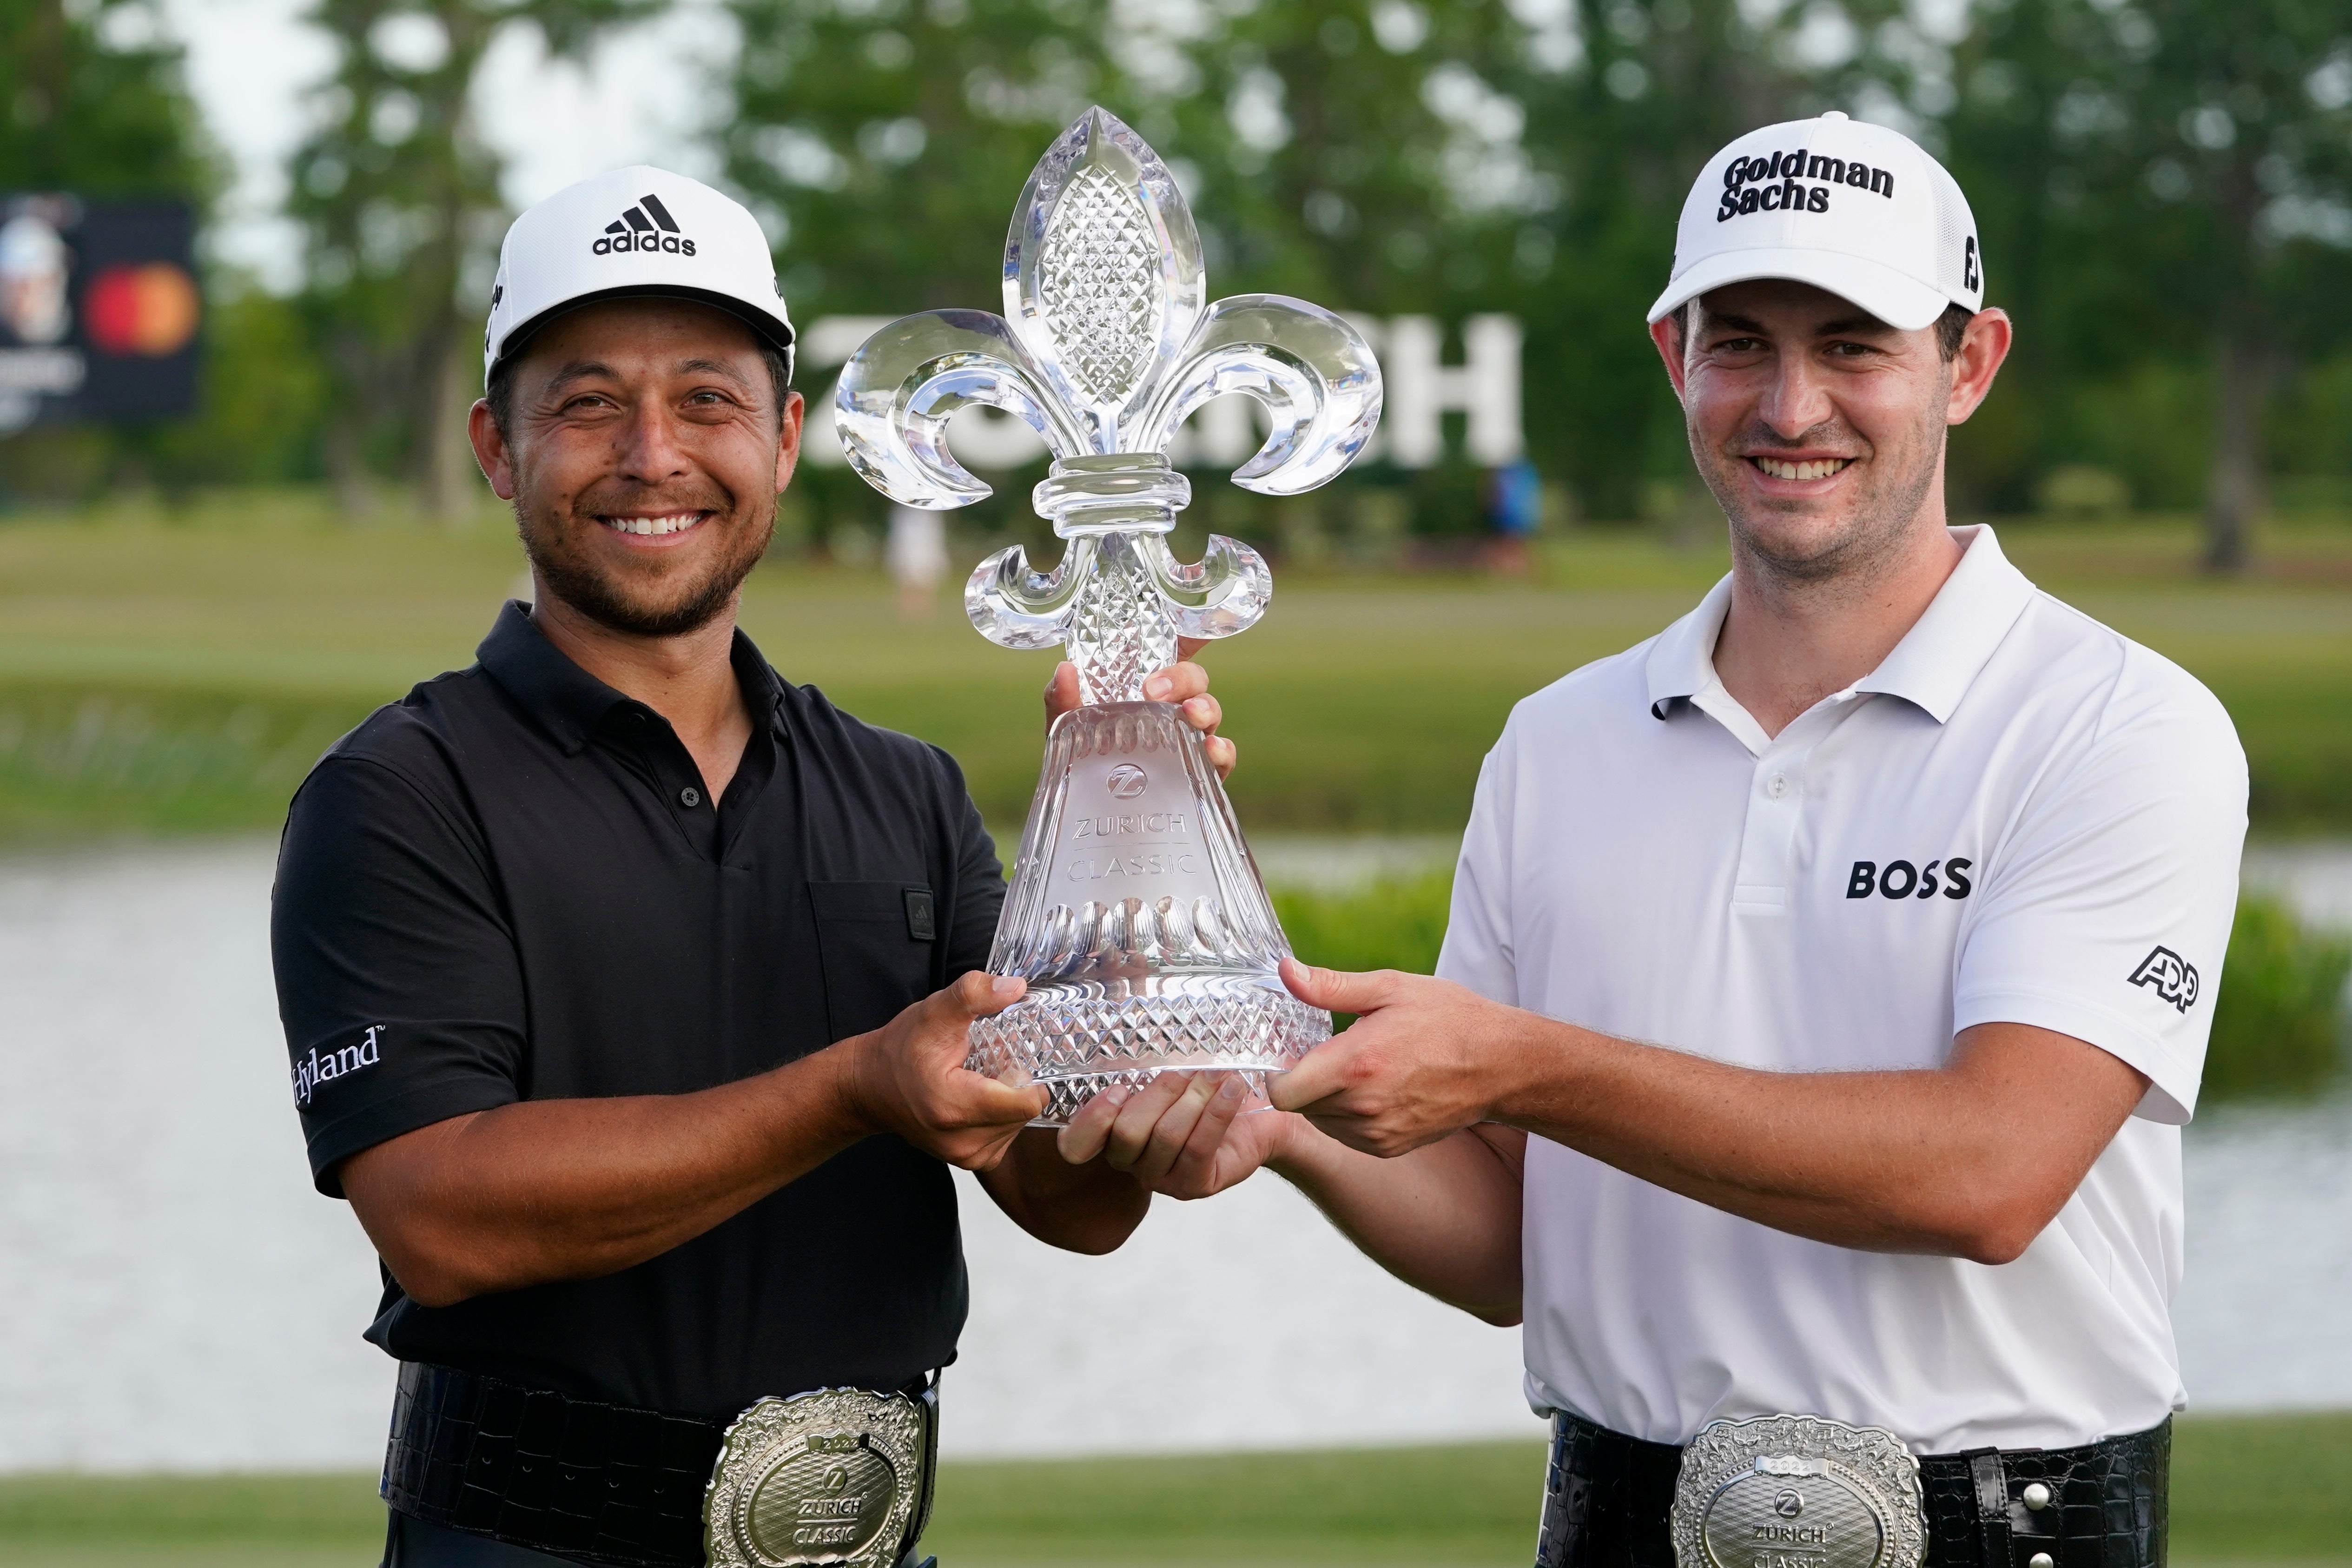 Xander Schauffele, left, and Patrick Cantlay, right, hold up the trophy after winning the PGA Zurich Classic golf tournament at TPC Louisiana (AP Photo/Gerald Herbert)